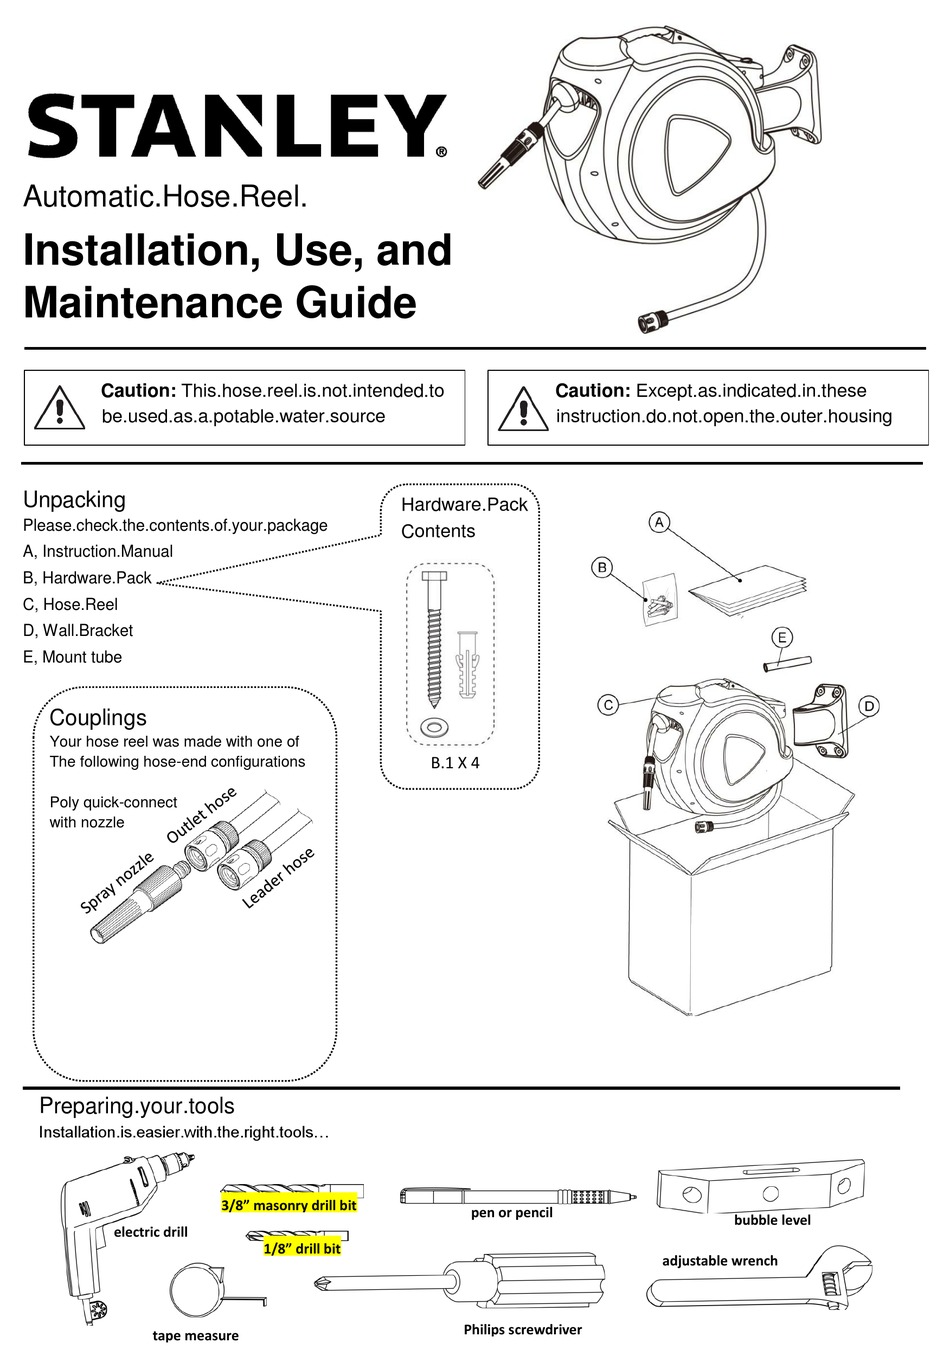 Operating Instructions; Extending The Hose - Stanley BXGT10147E  Installation, Use And Maintenance Manual [Page 3]